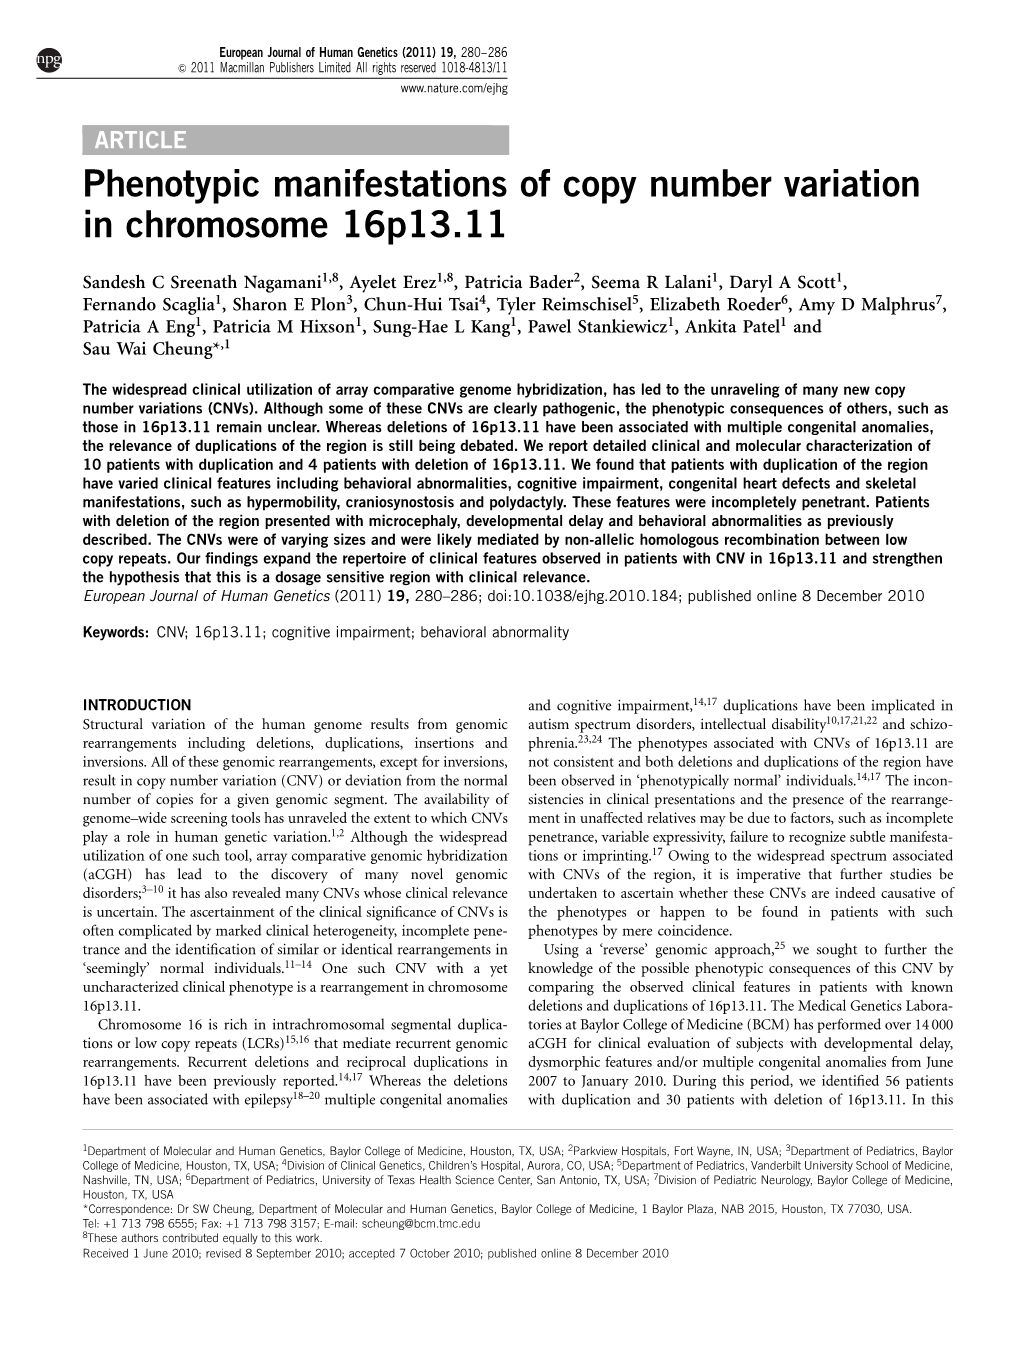 Phenotypic Manifestations of Copy Number Variation in Chromosome 16P13.11